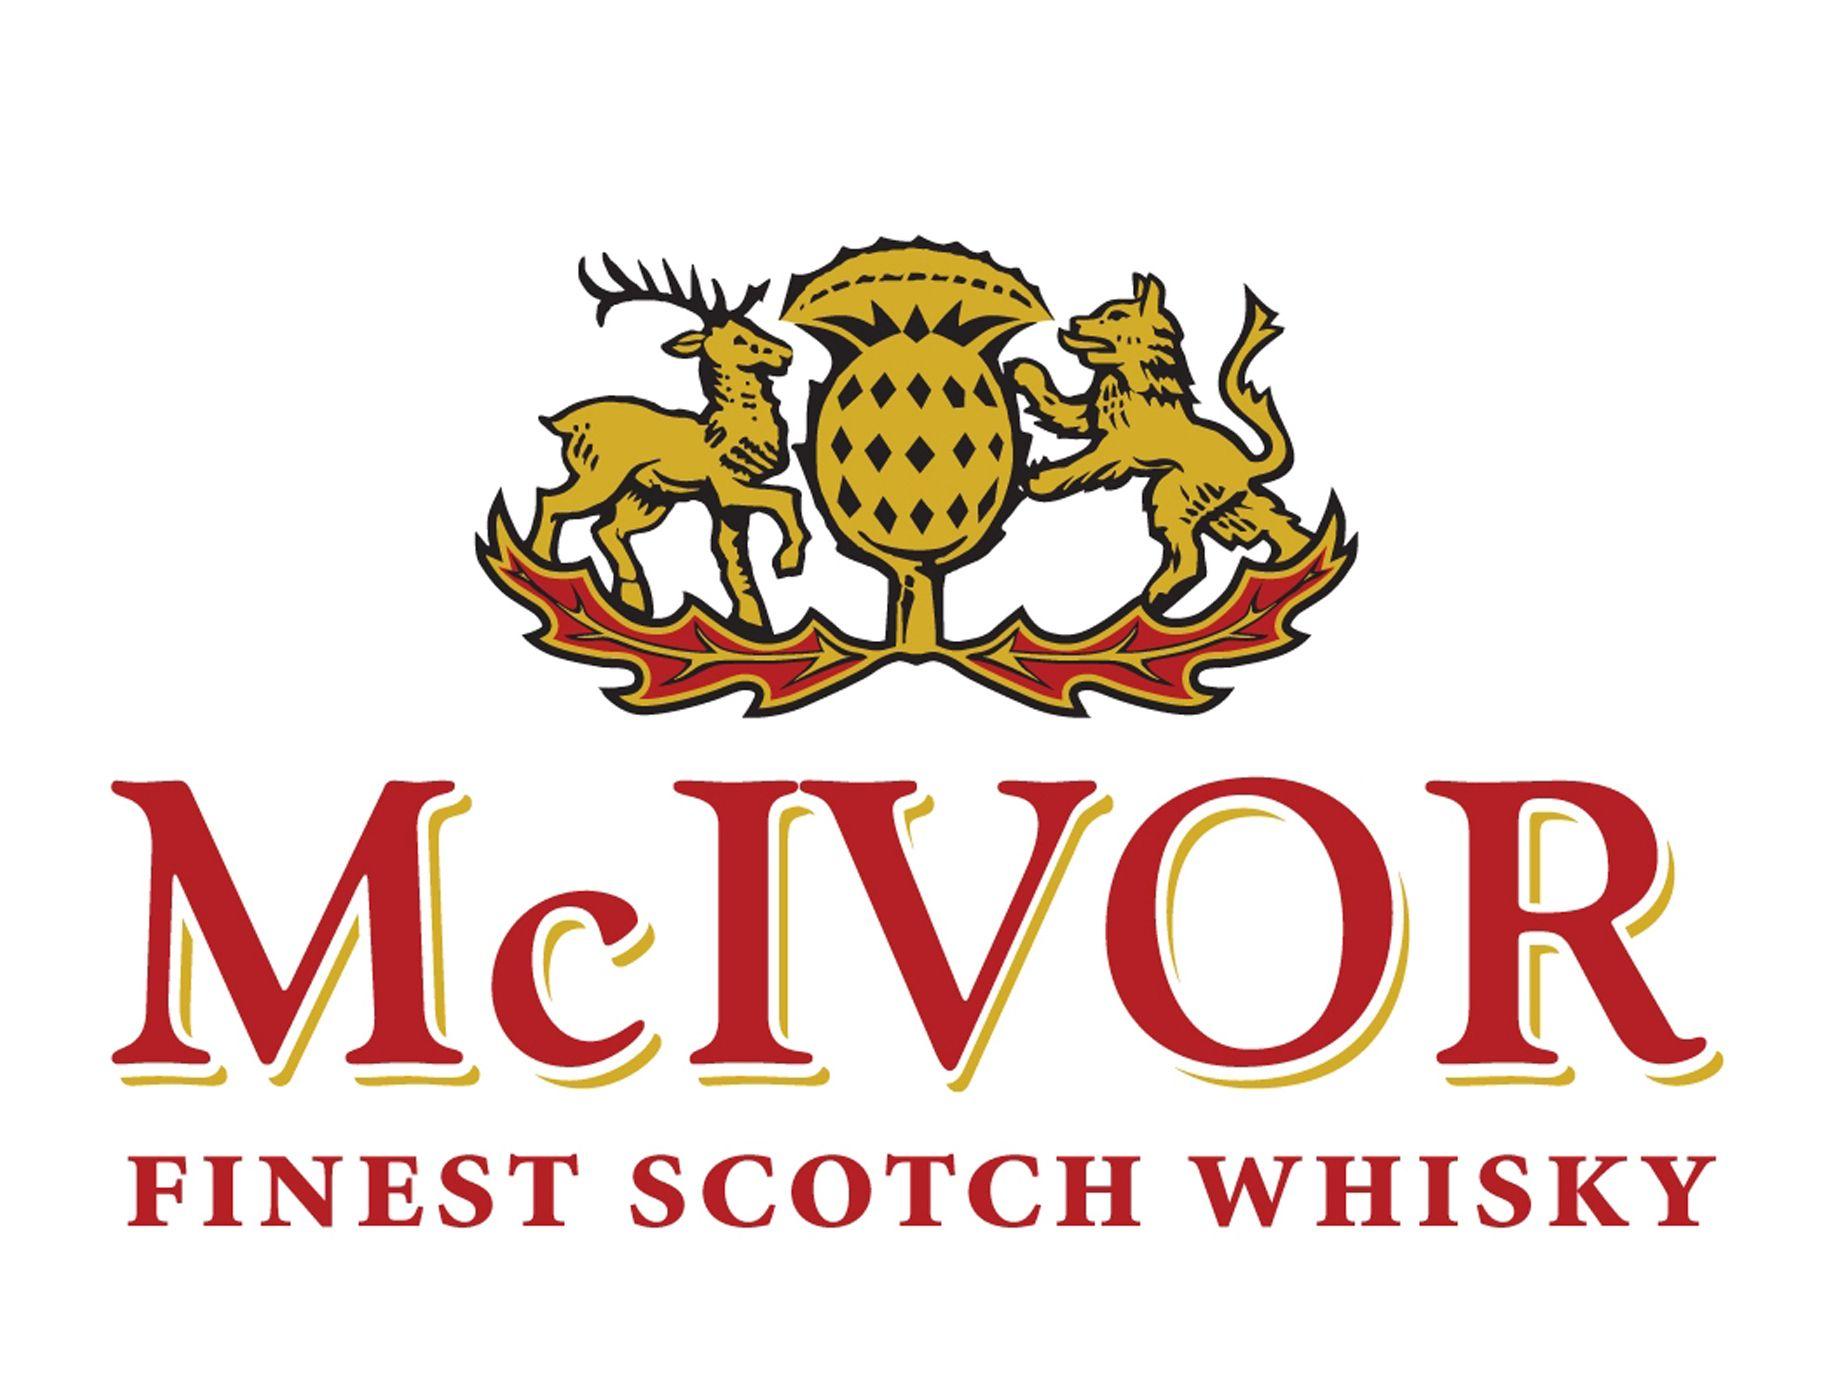 Whiskey Company Logo - Famous Whisky Brands and Logos